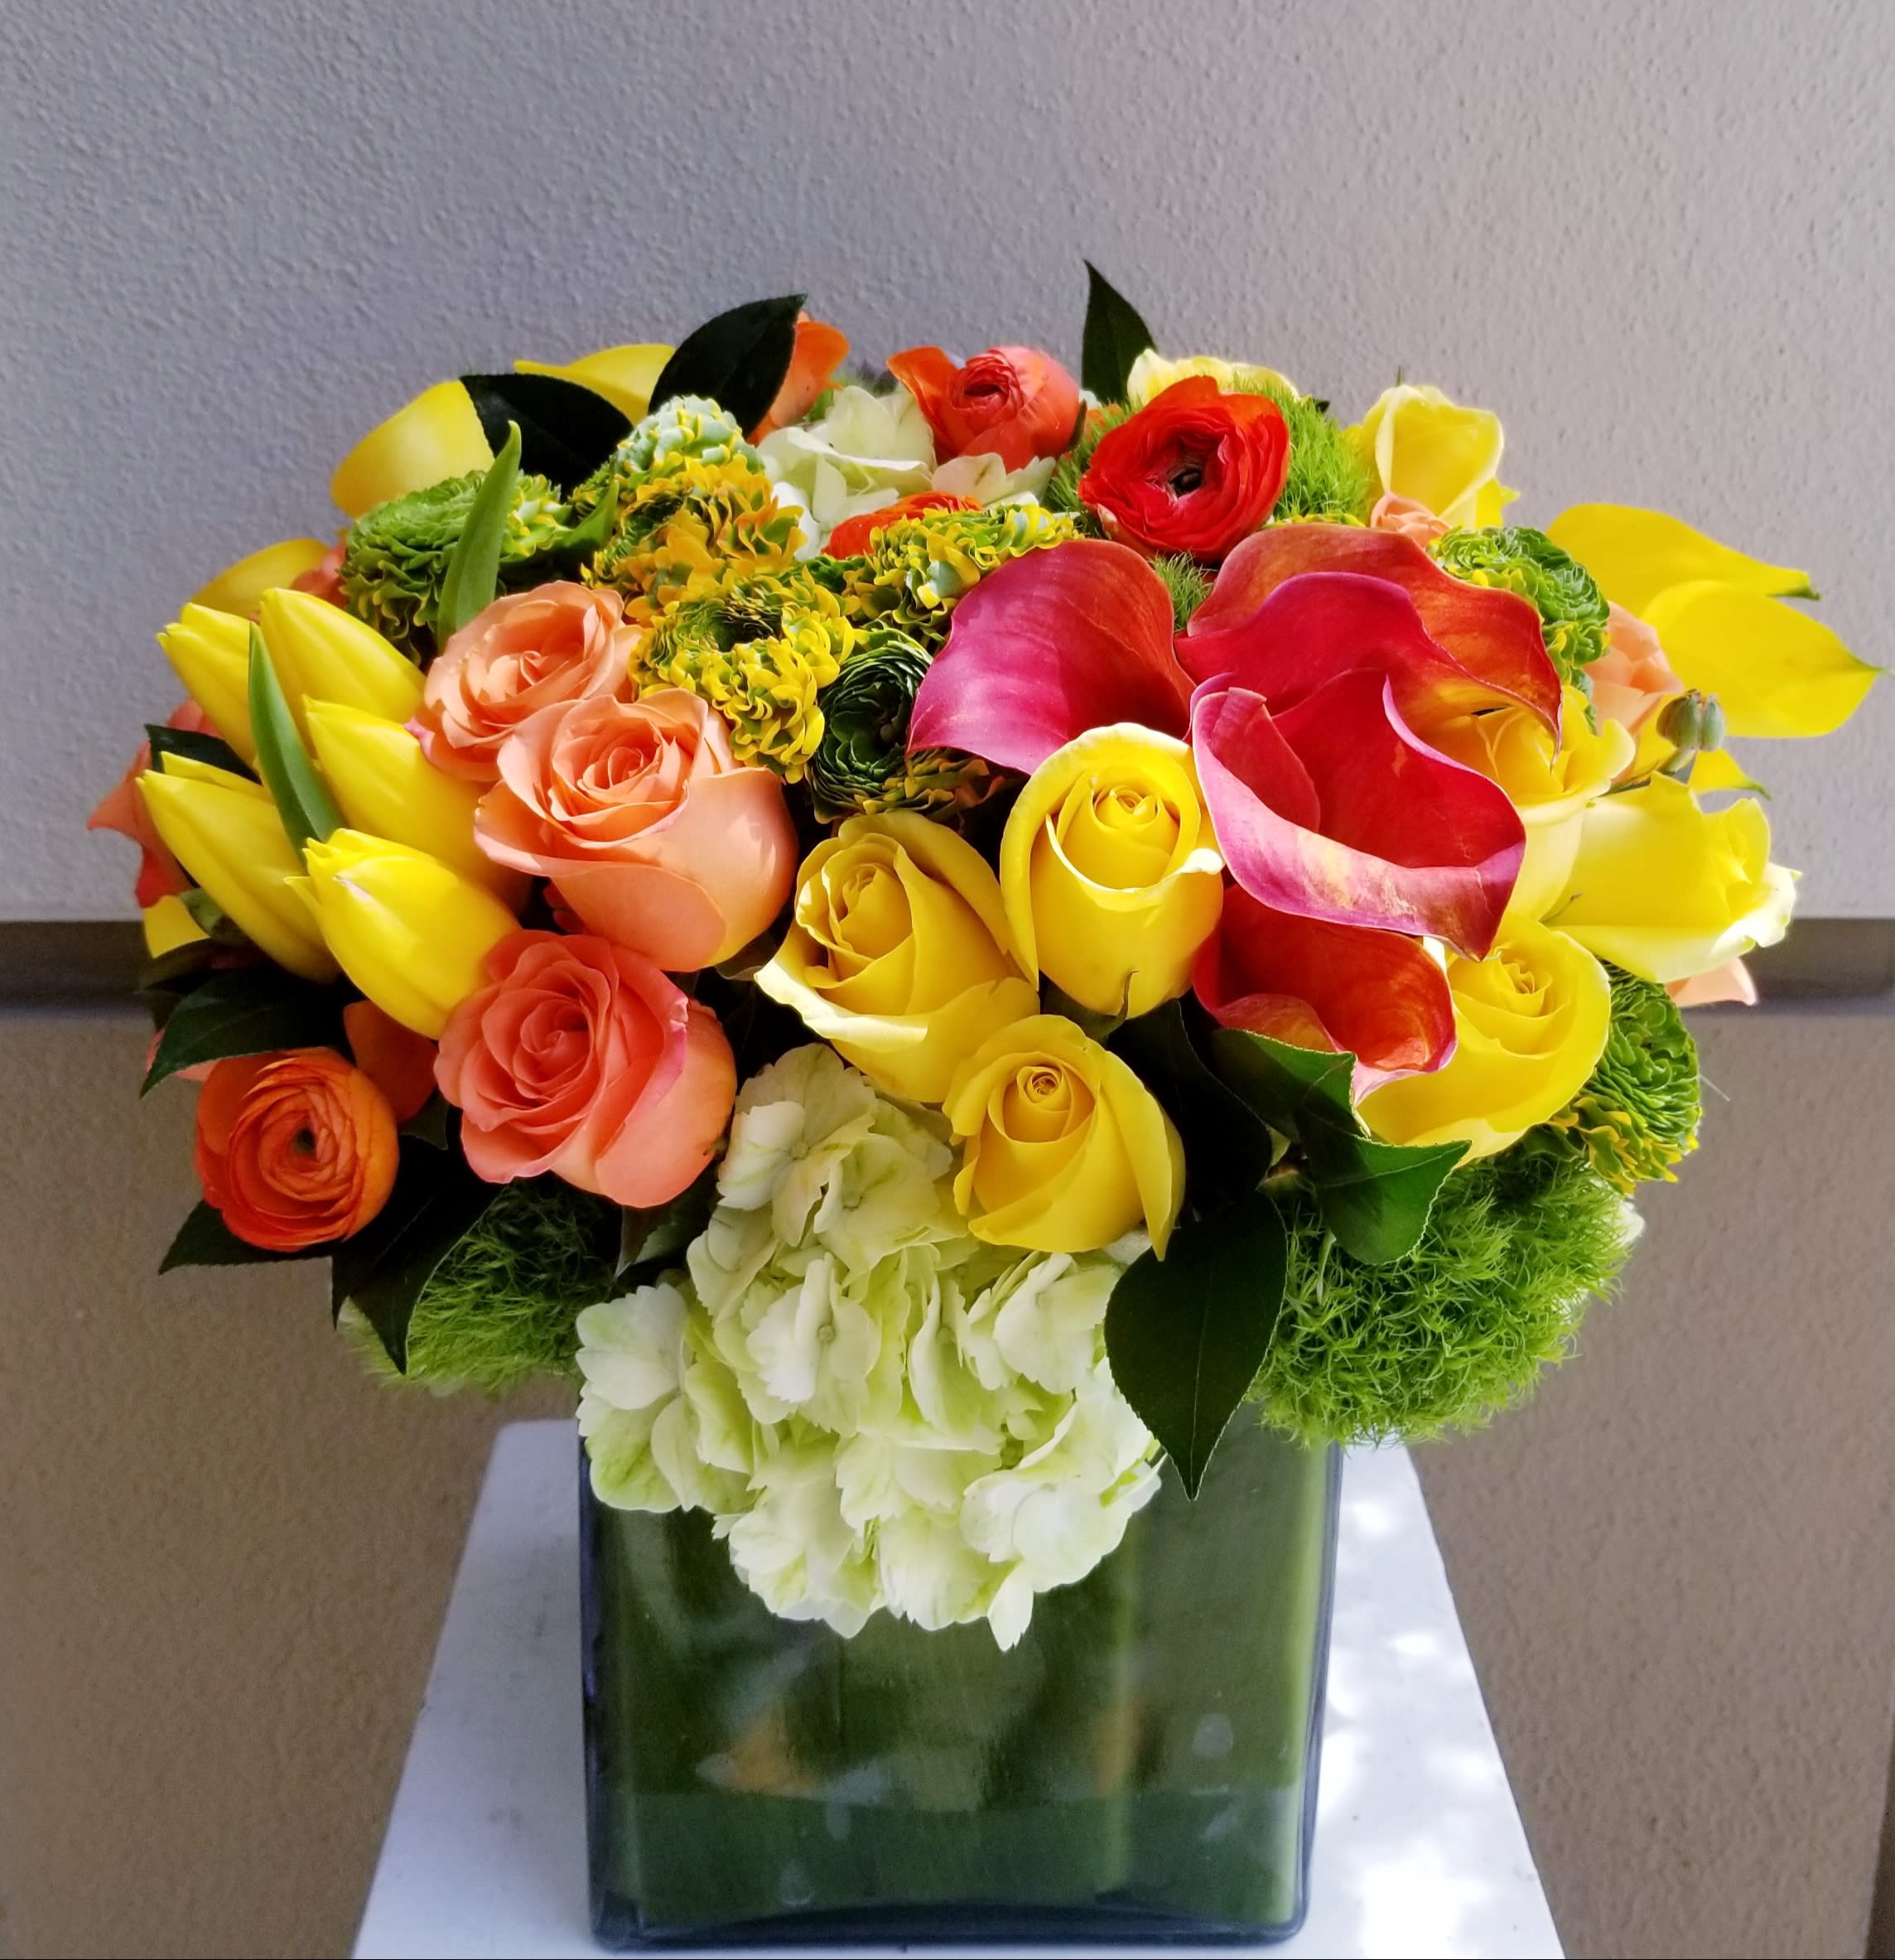 Citrus Blend - Bright yellow and orange blooms designed in a large square. Among the flowers used are mini calls, roses, tulips, ranunculus and hydrangeas.